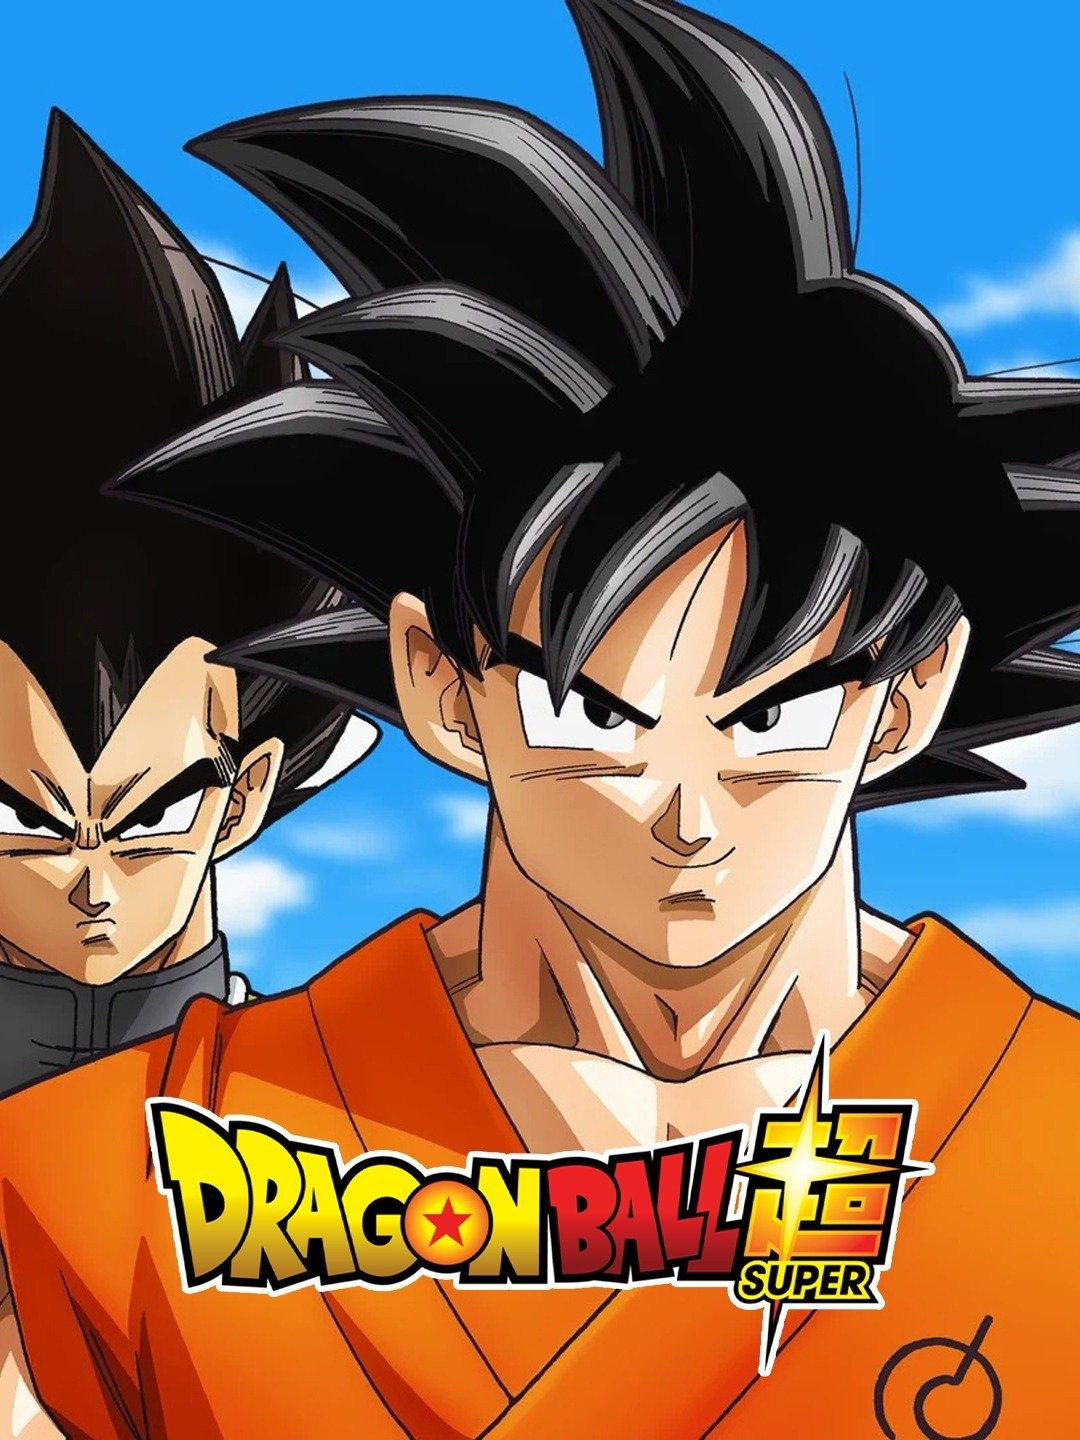 Dragon Ball Super: Broly - Rotten Tomatoes